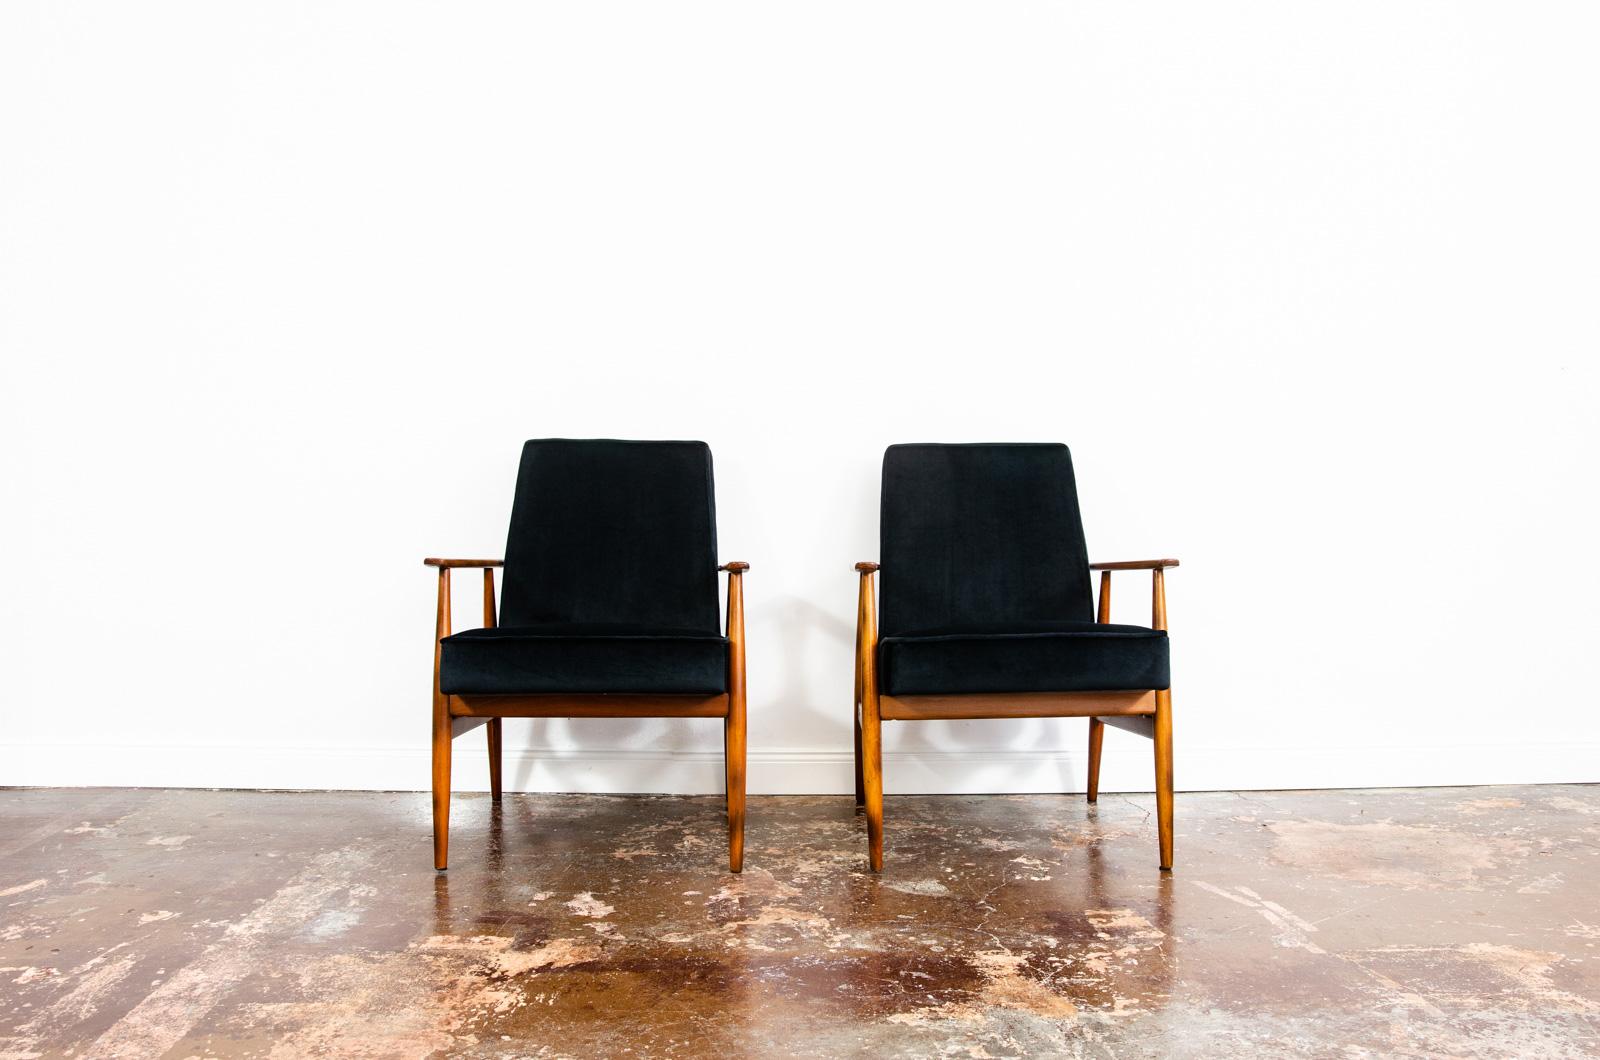 Pair of mid-century armchairs, type 300-190 designed by H. Lis, manufactured in Poland, 1960's.
Reupholstered in black soft fabric. 
Solid wood frames have been completely restored and refinished.